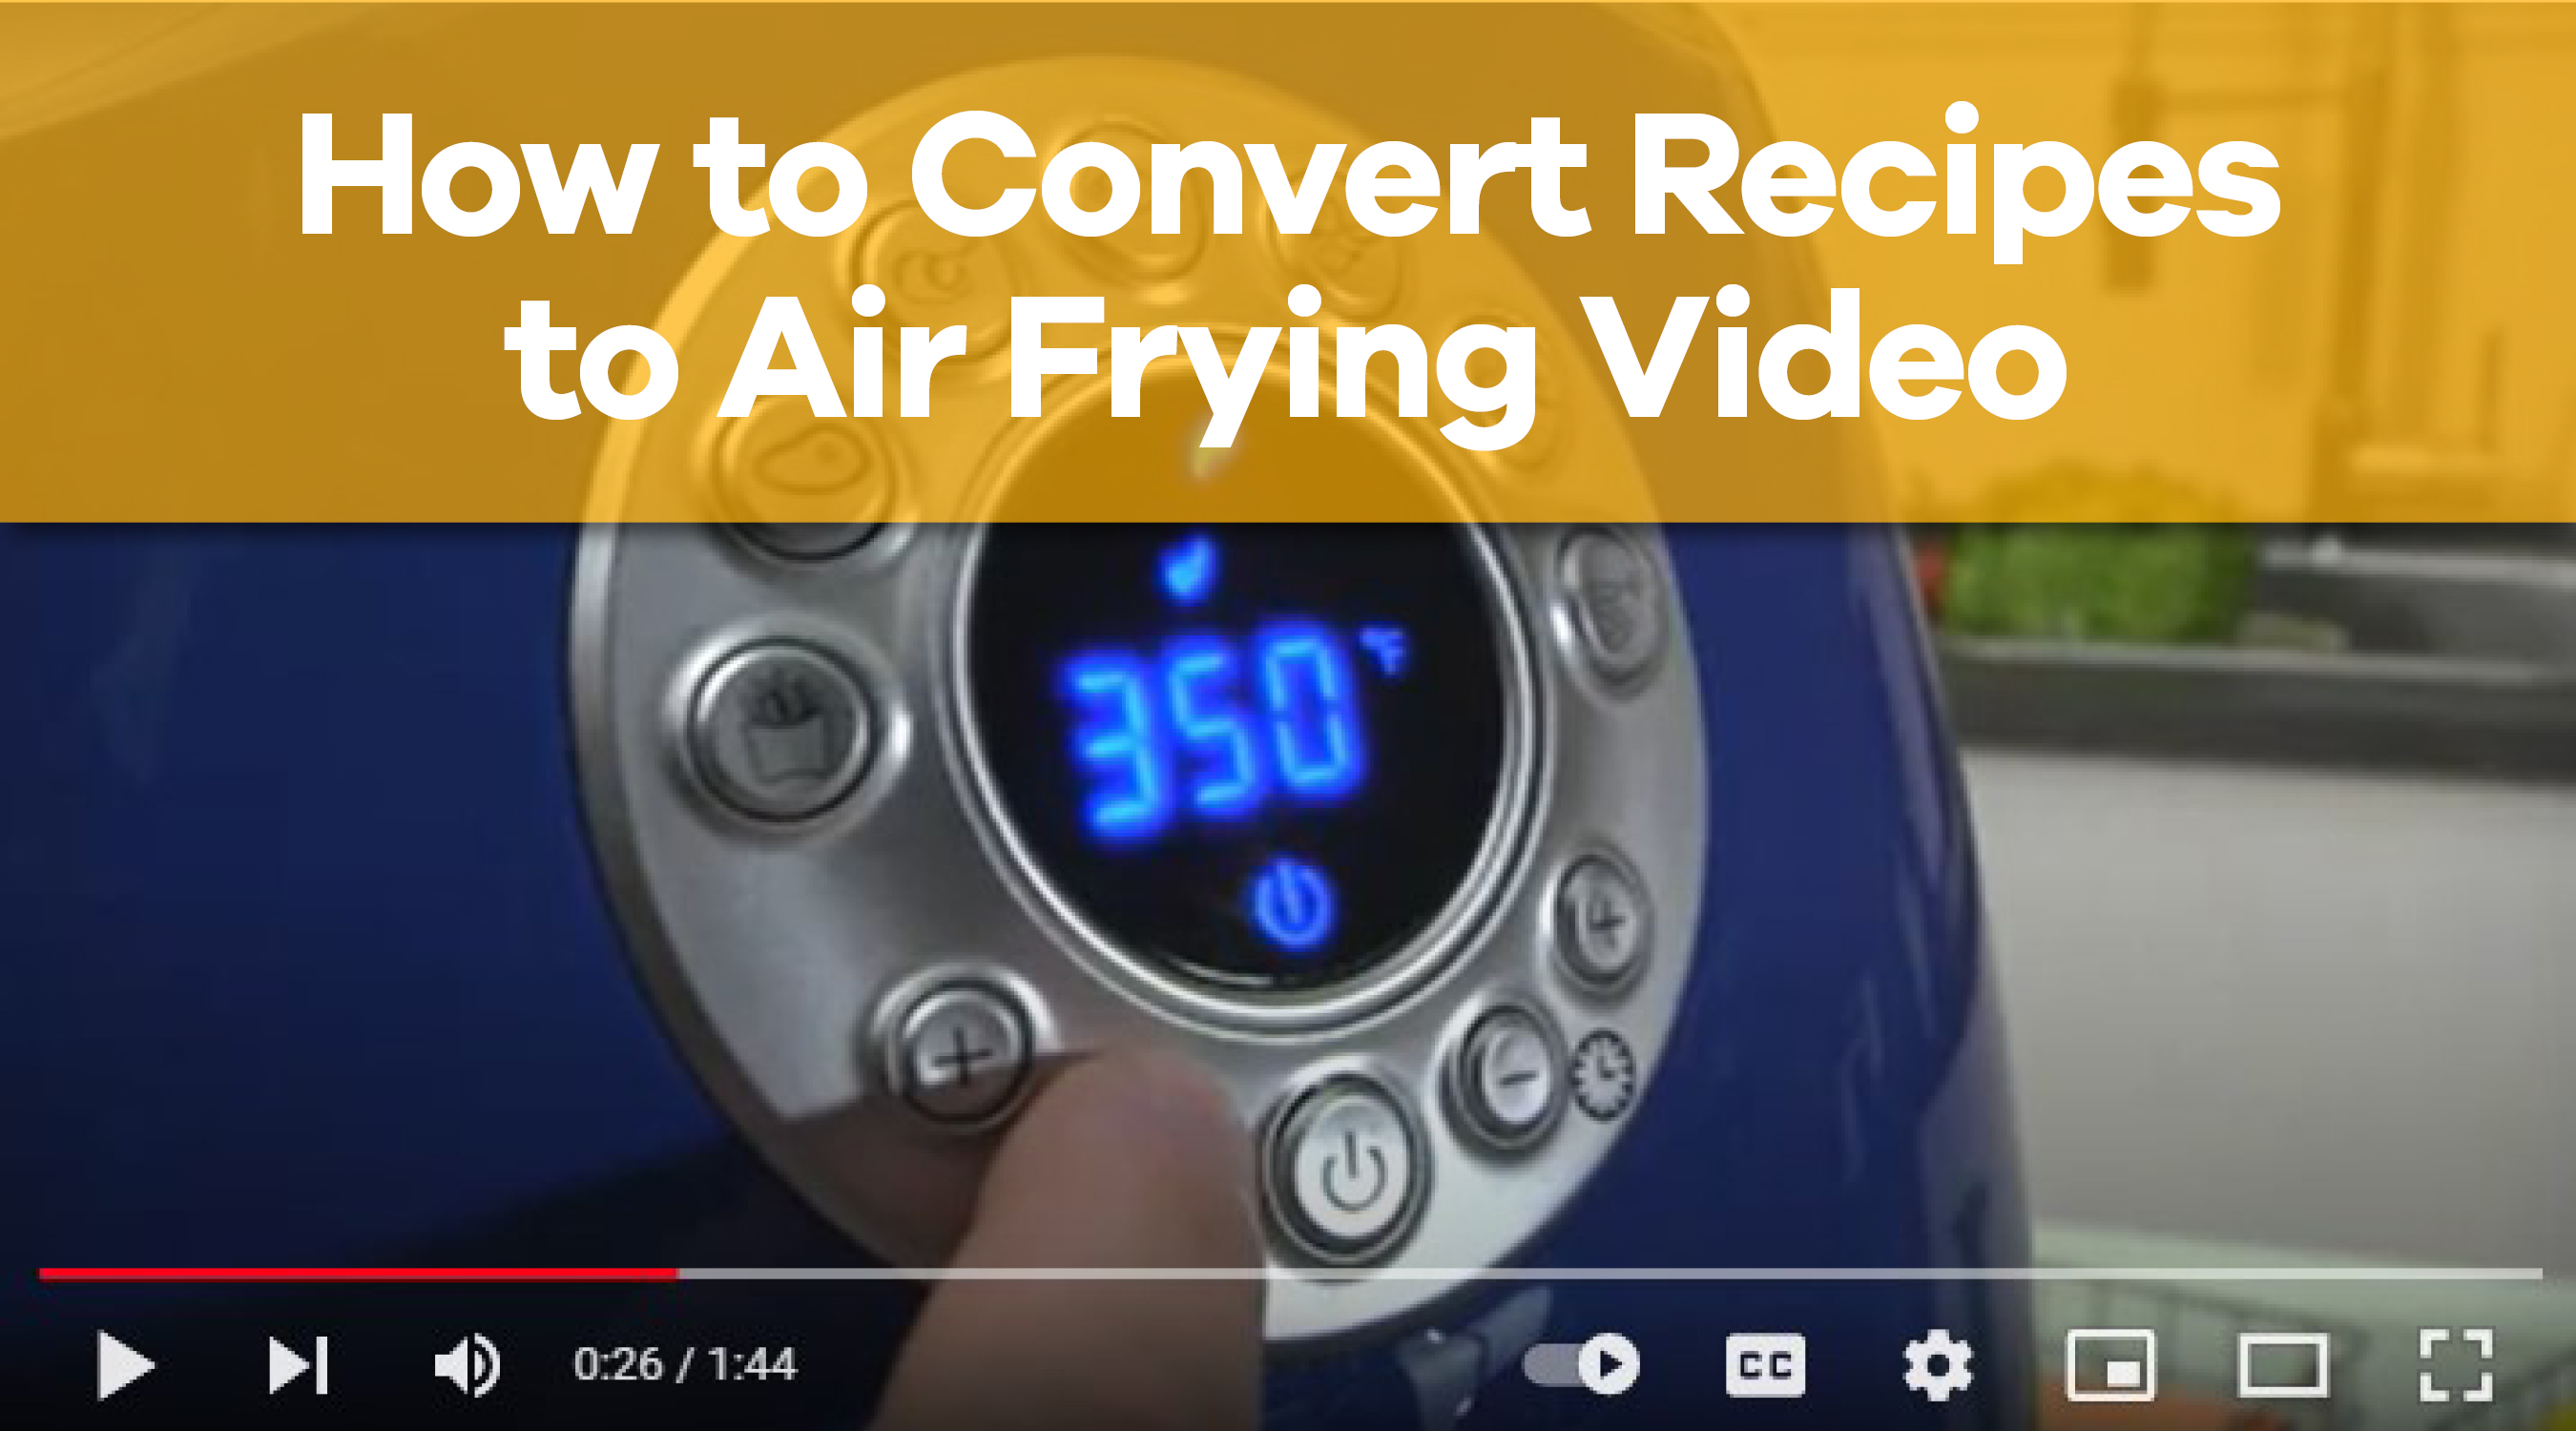 Play Video: How to Convert Recipes to Air Frying